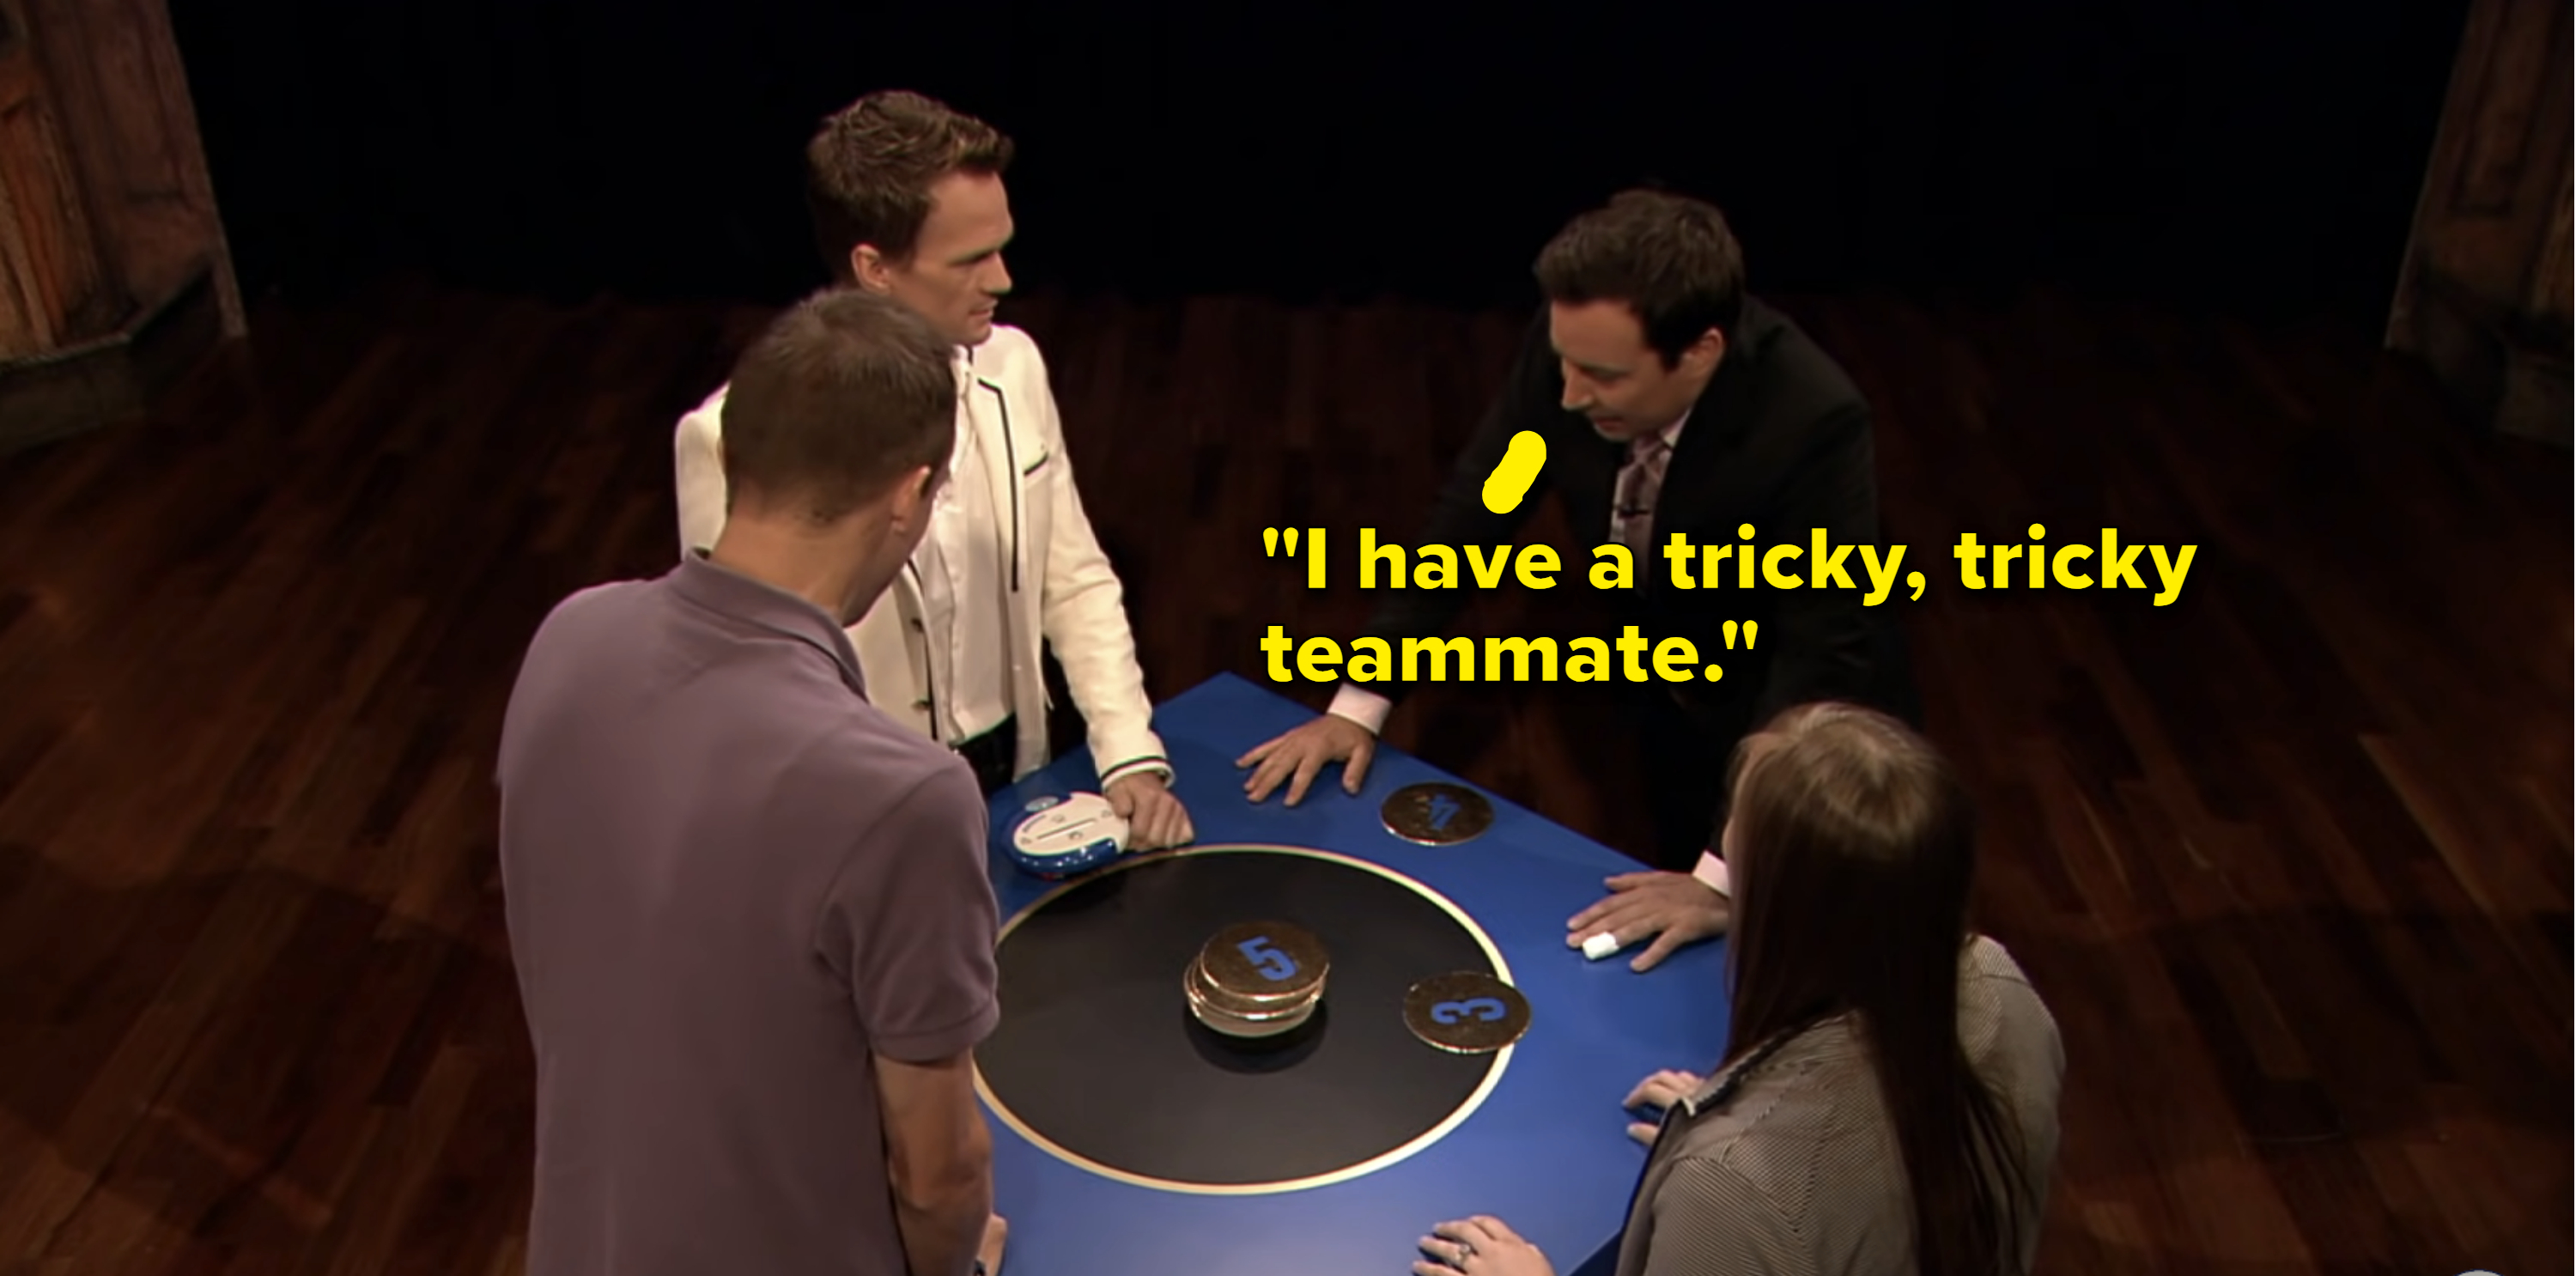 Jimmy says, &quot;I have a tricky, tricky teammate&quot;